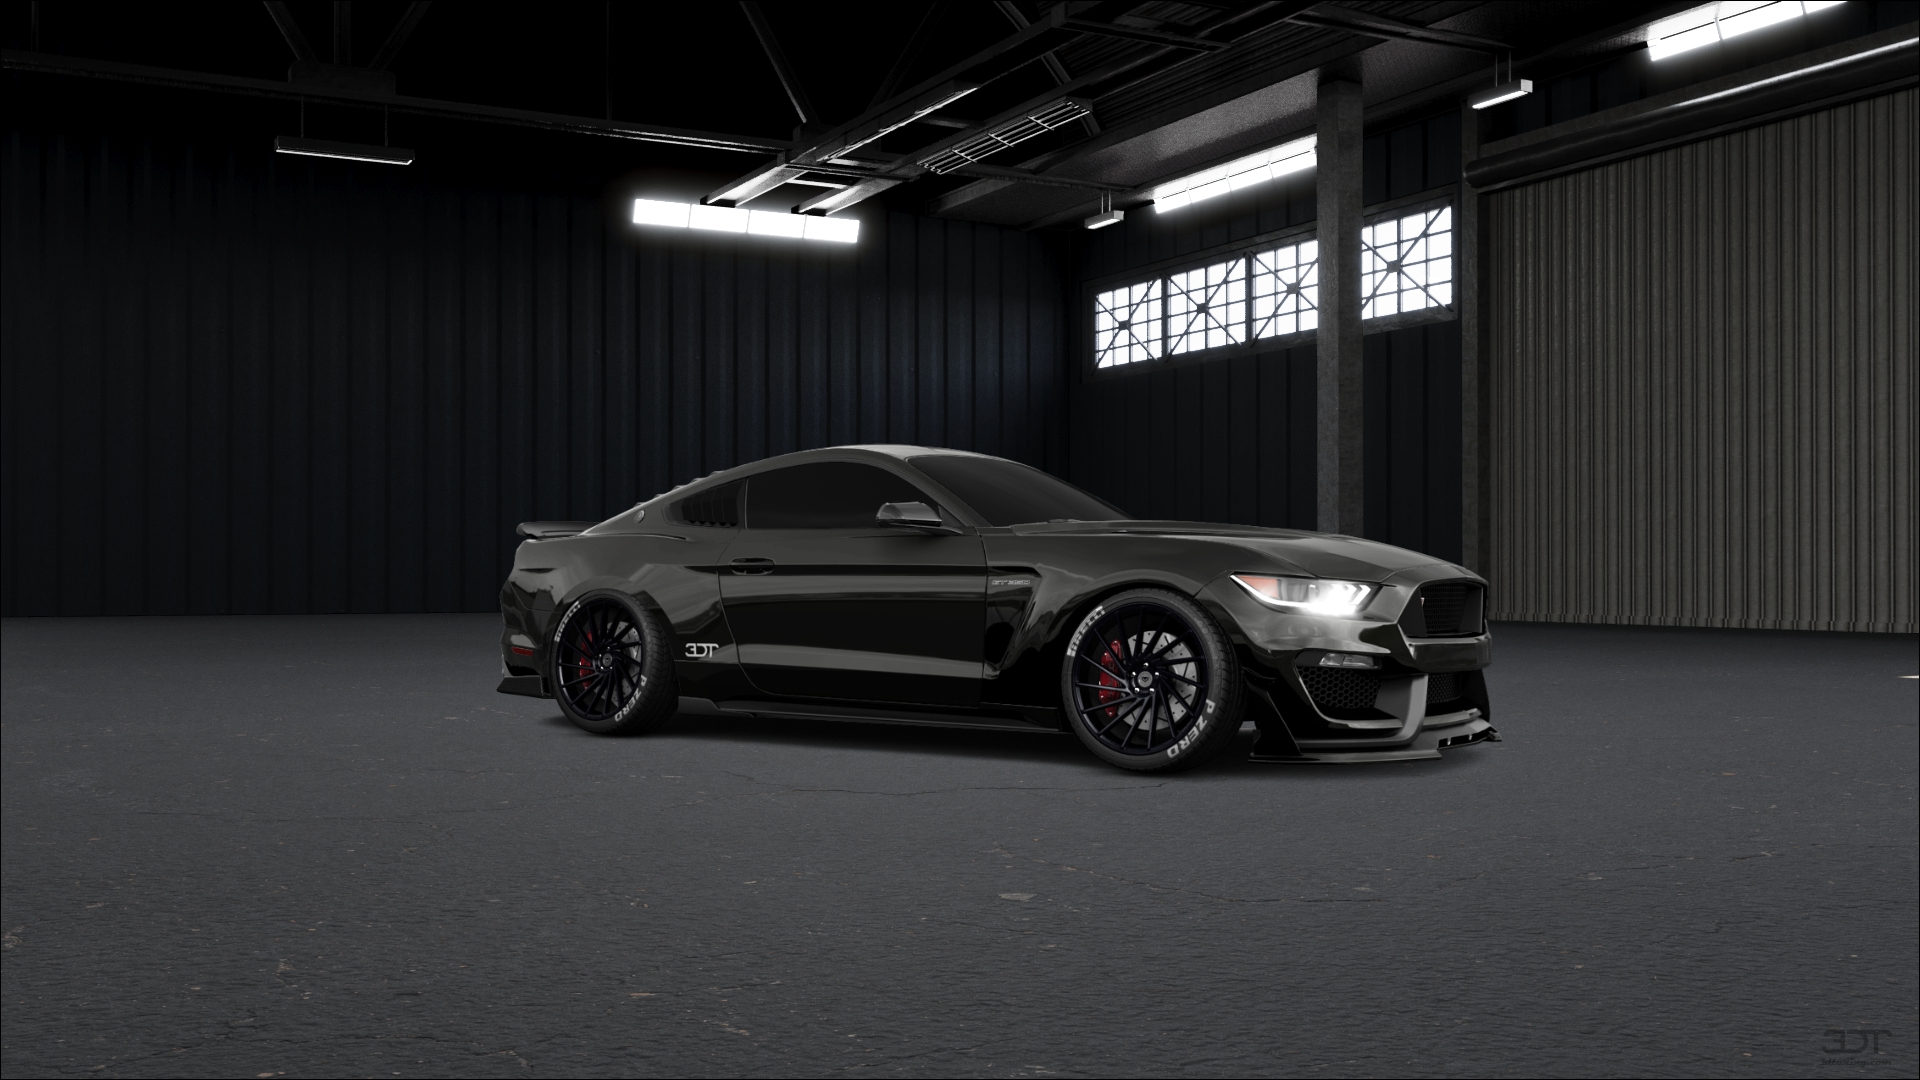 Ford Mustang GT350 challenge 2 Door Coupe 4015 tuning